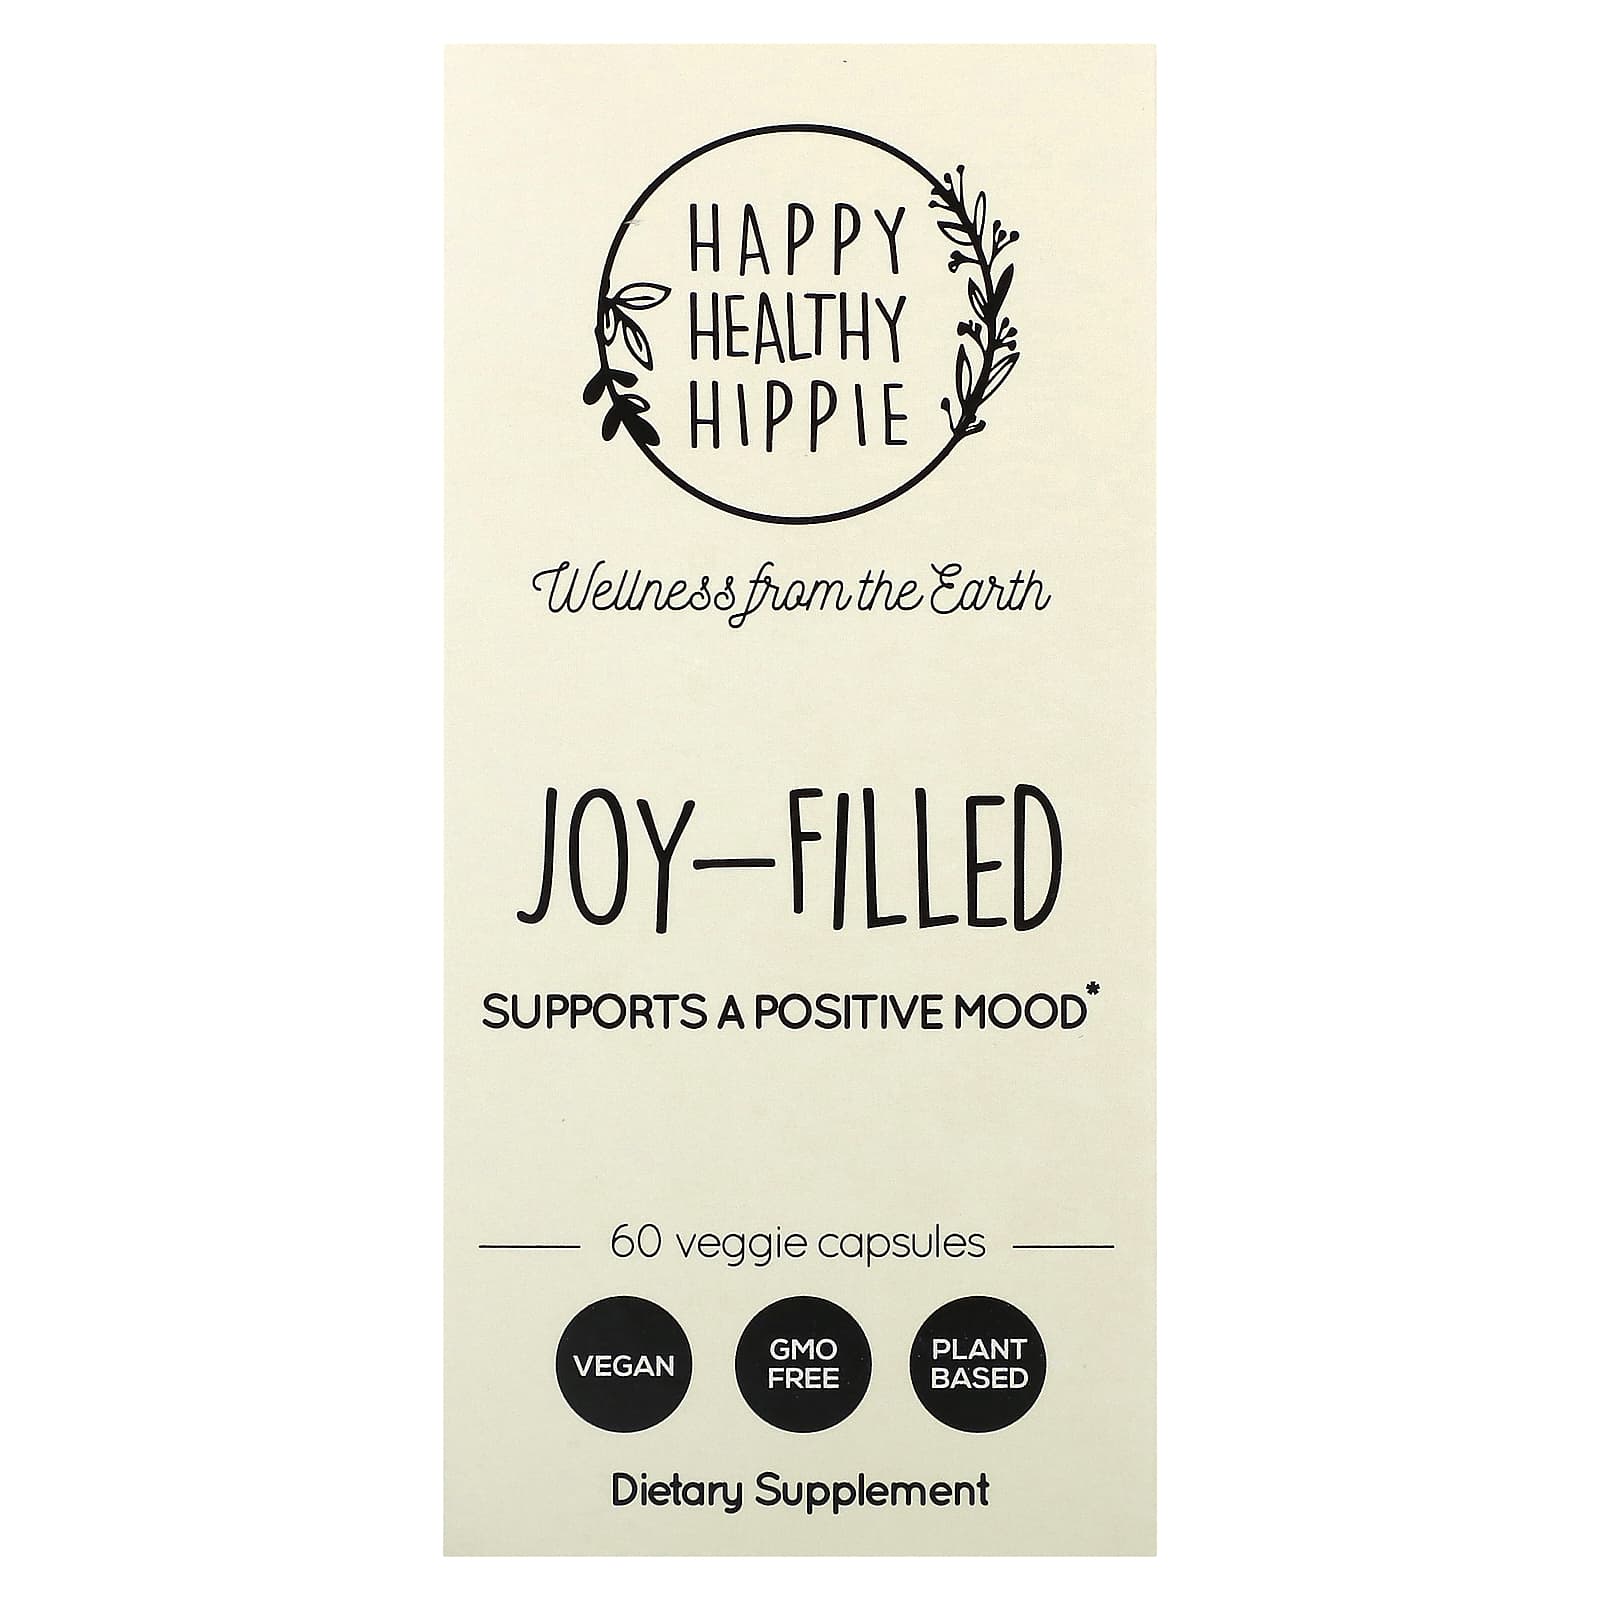 Happy Healthy Hippie-Joy-Filled- Supports a Positive Mood-60 Veggie Capsules